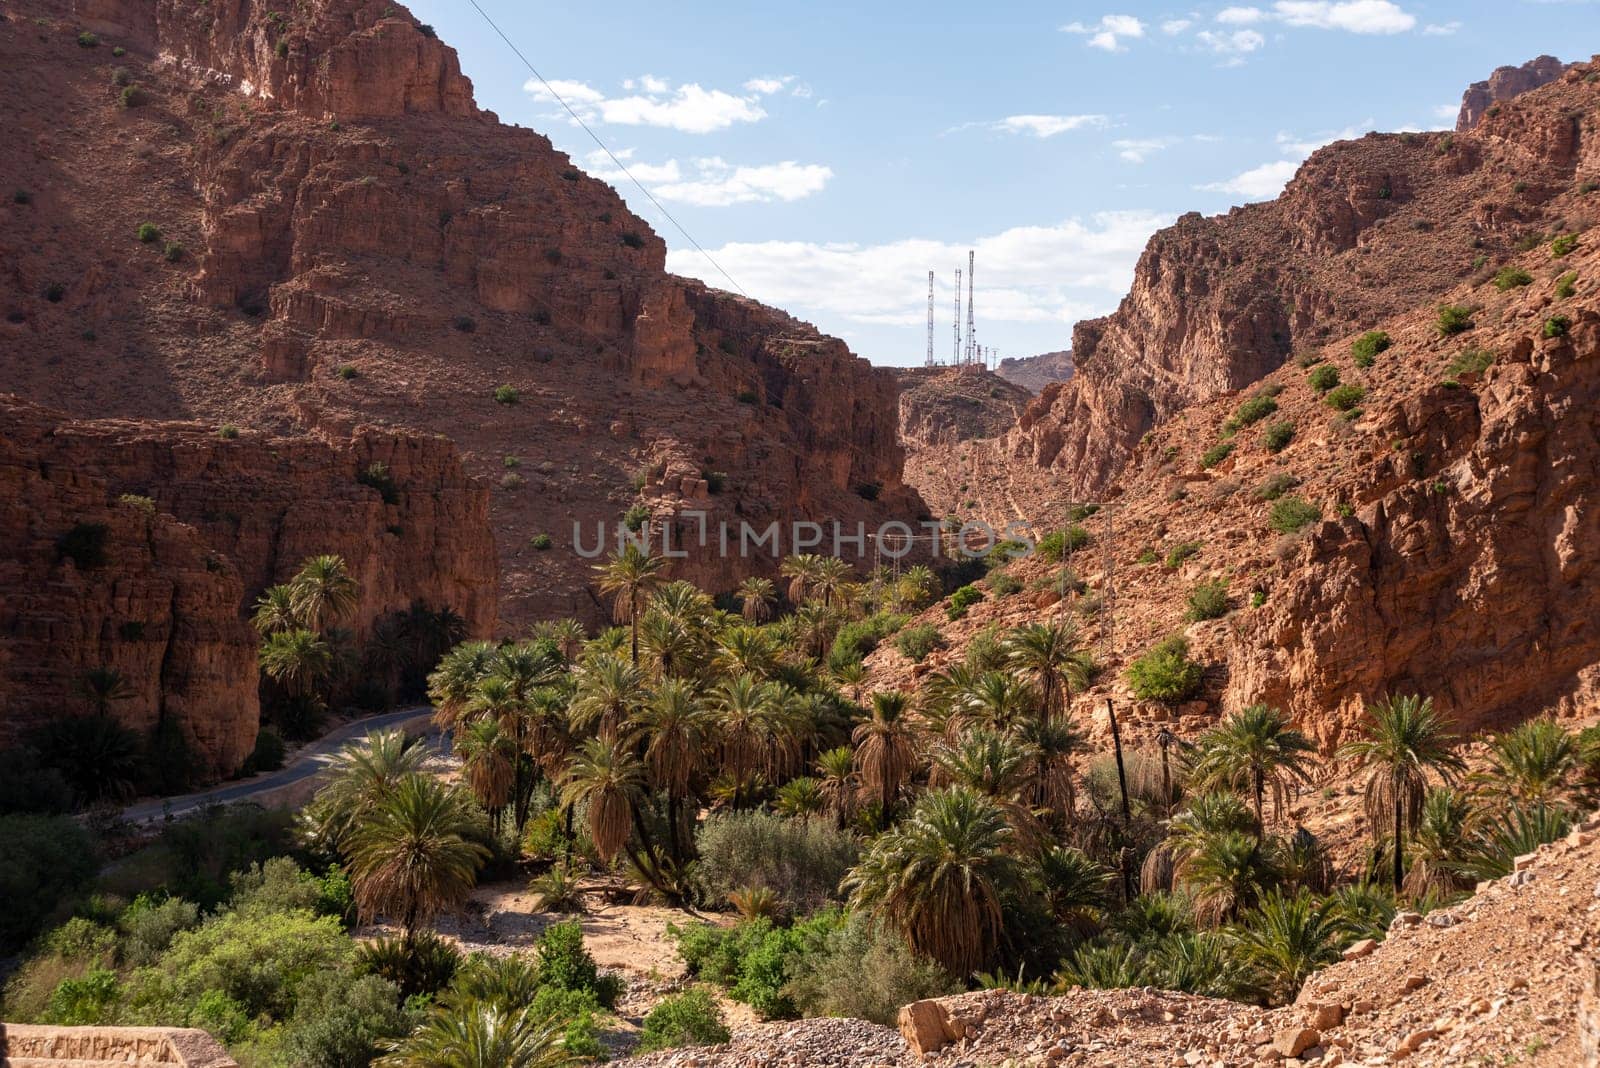 Magnificent oasis in the Ait Mansour gorge in the Anti-Atlas mountains, Morocco